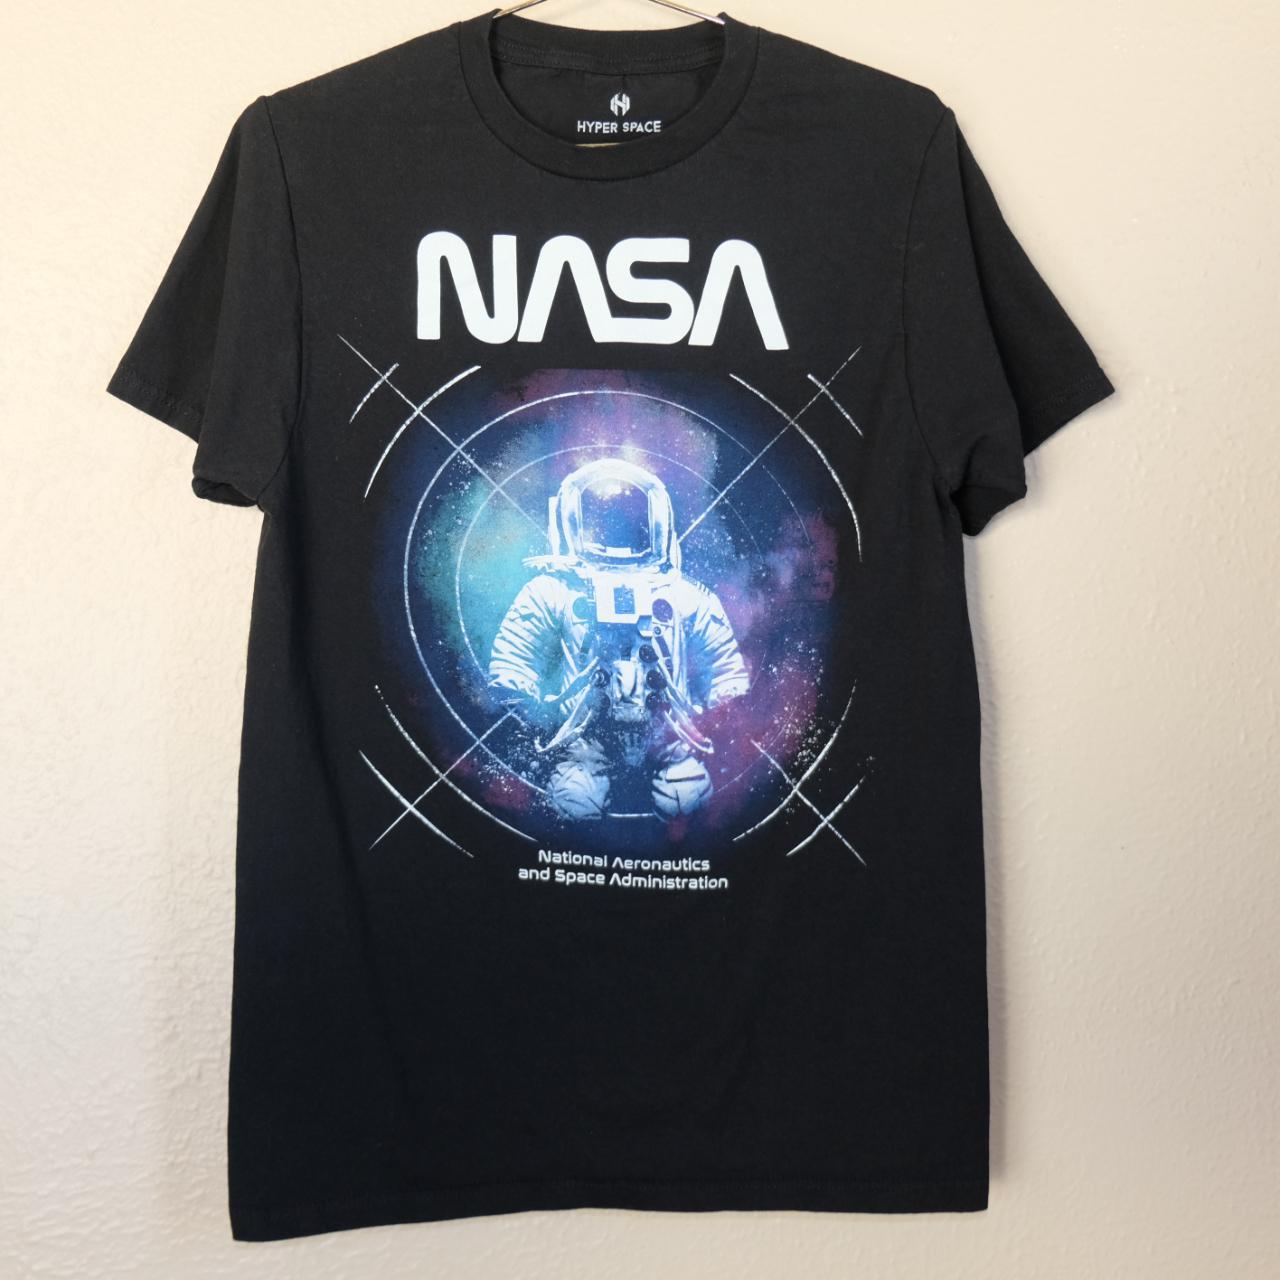 Product Image 1 - Pre-Loved NASA Astronaut Hyperspace Tee

Tag